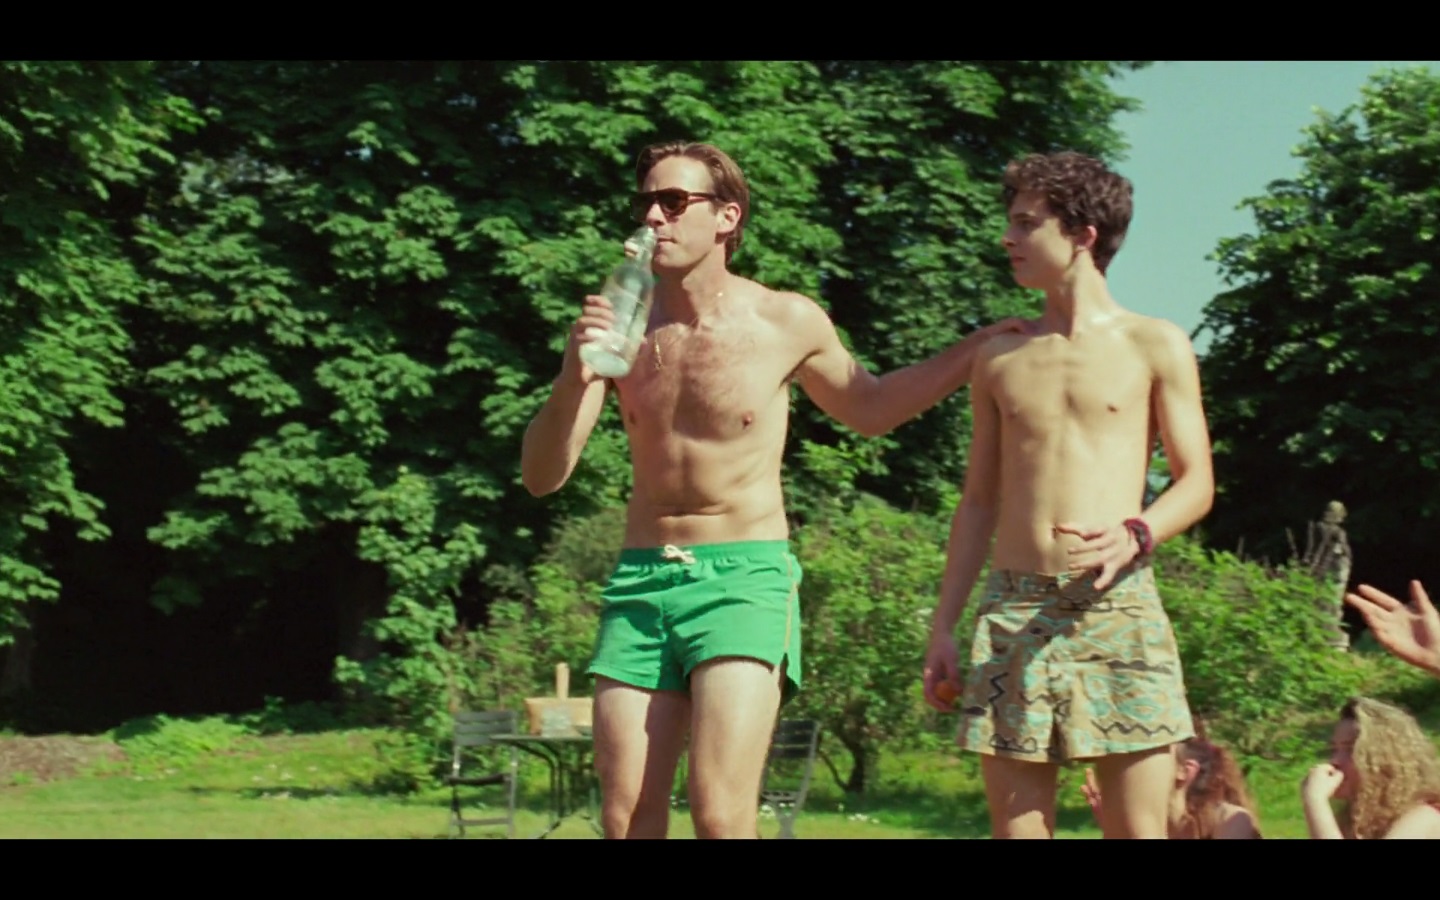 Call Me By Your Name - Timothée Chalamet & Armie Hammer.